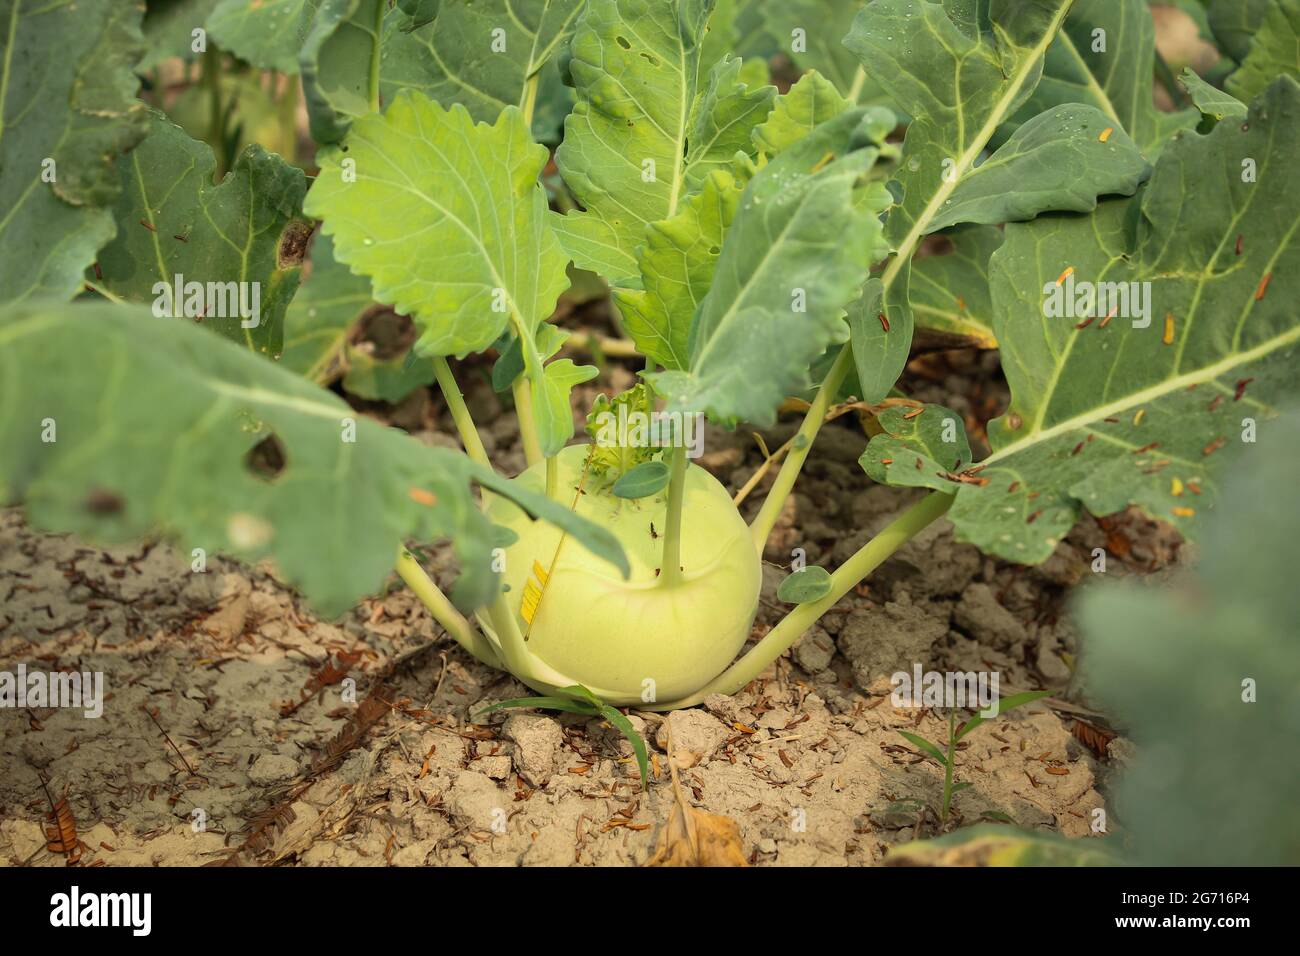 Turnip root vegetables in the garden, agriculture concept Stock Photo